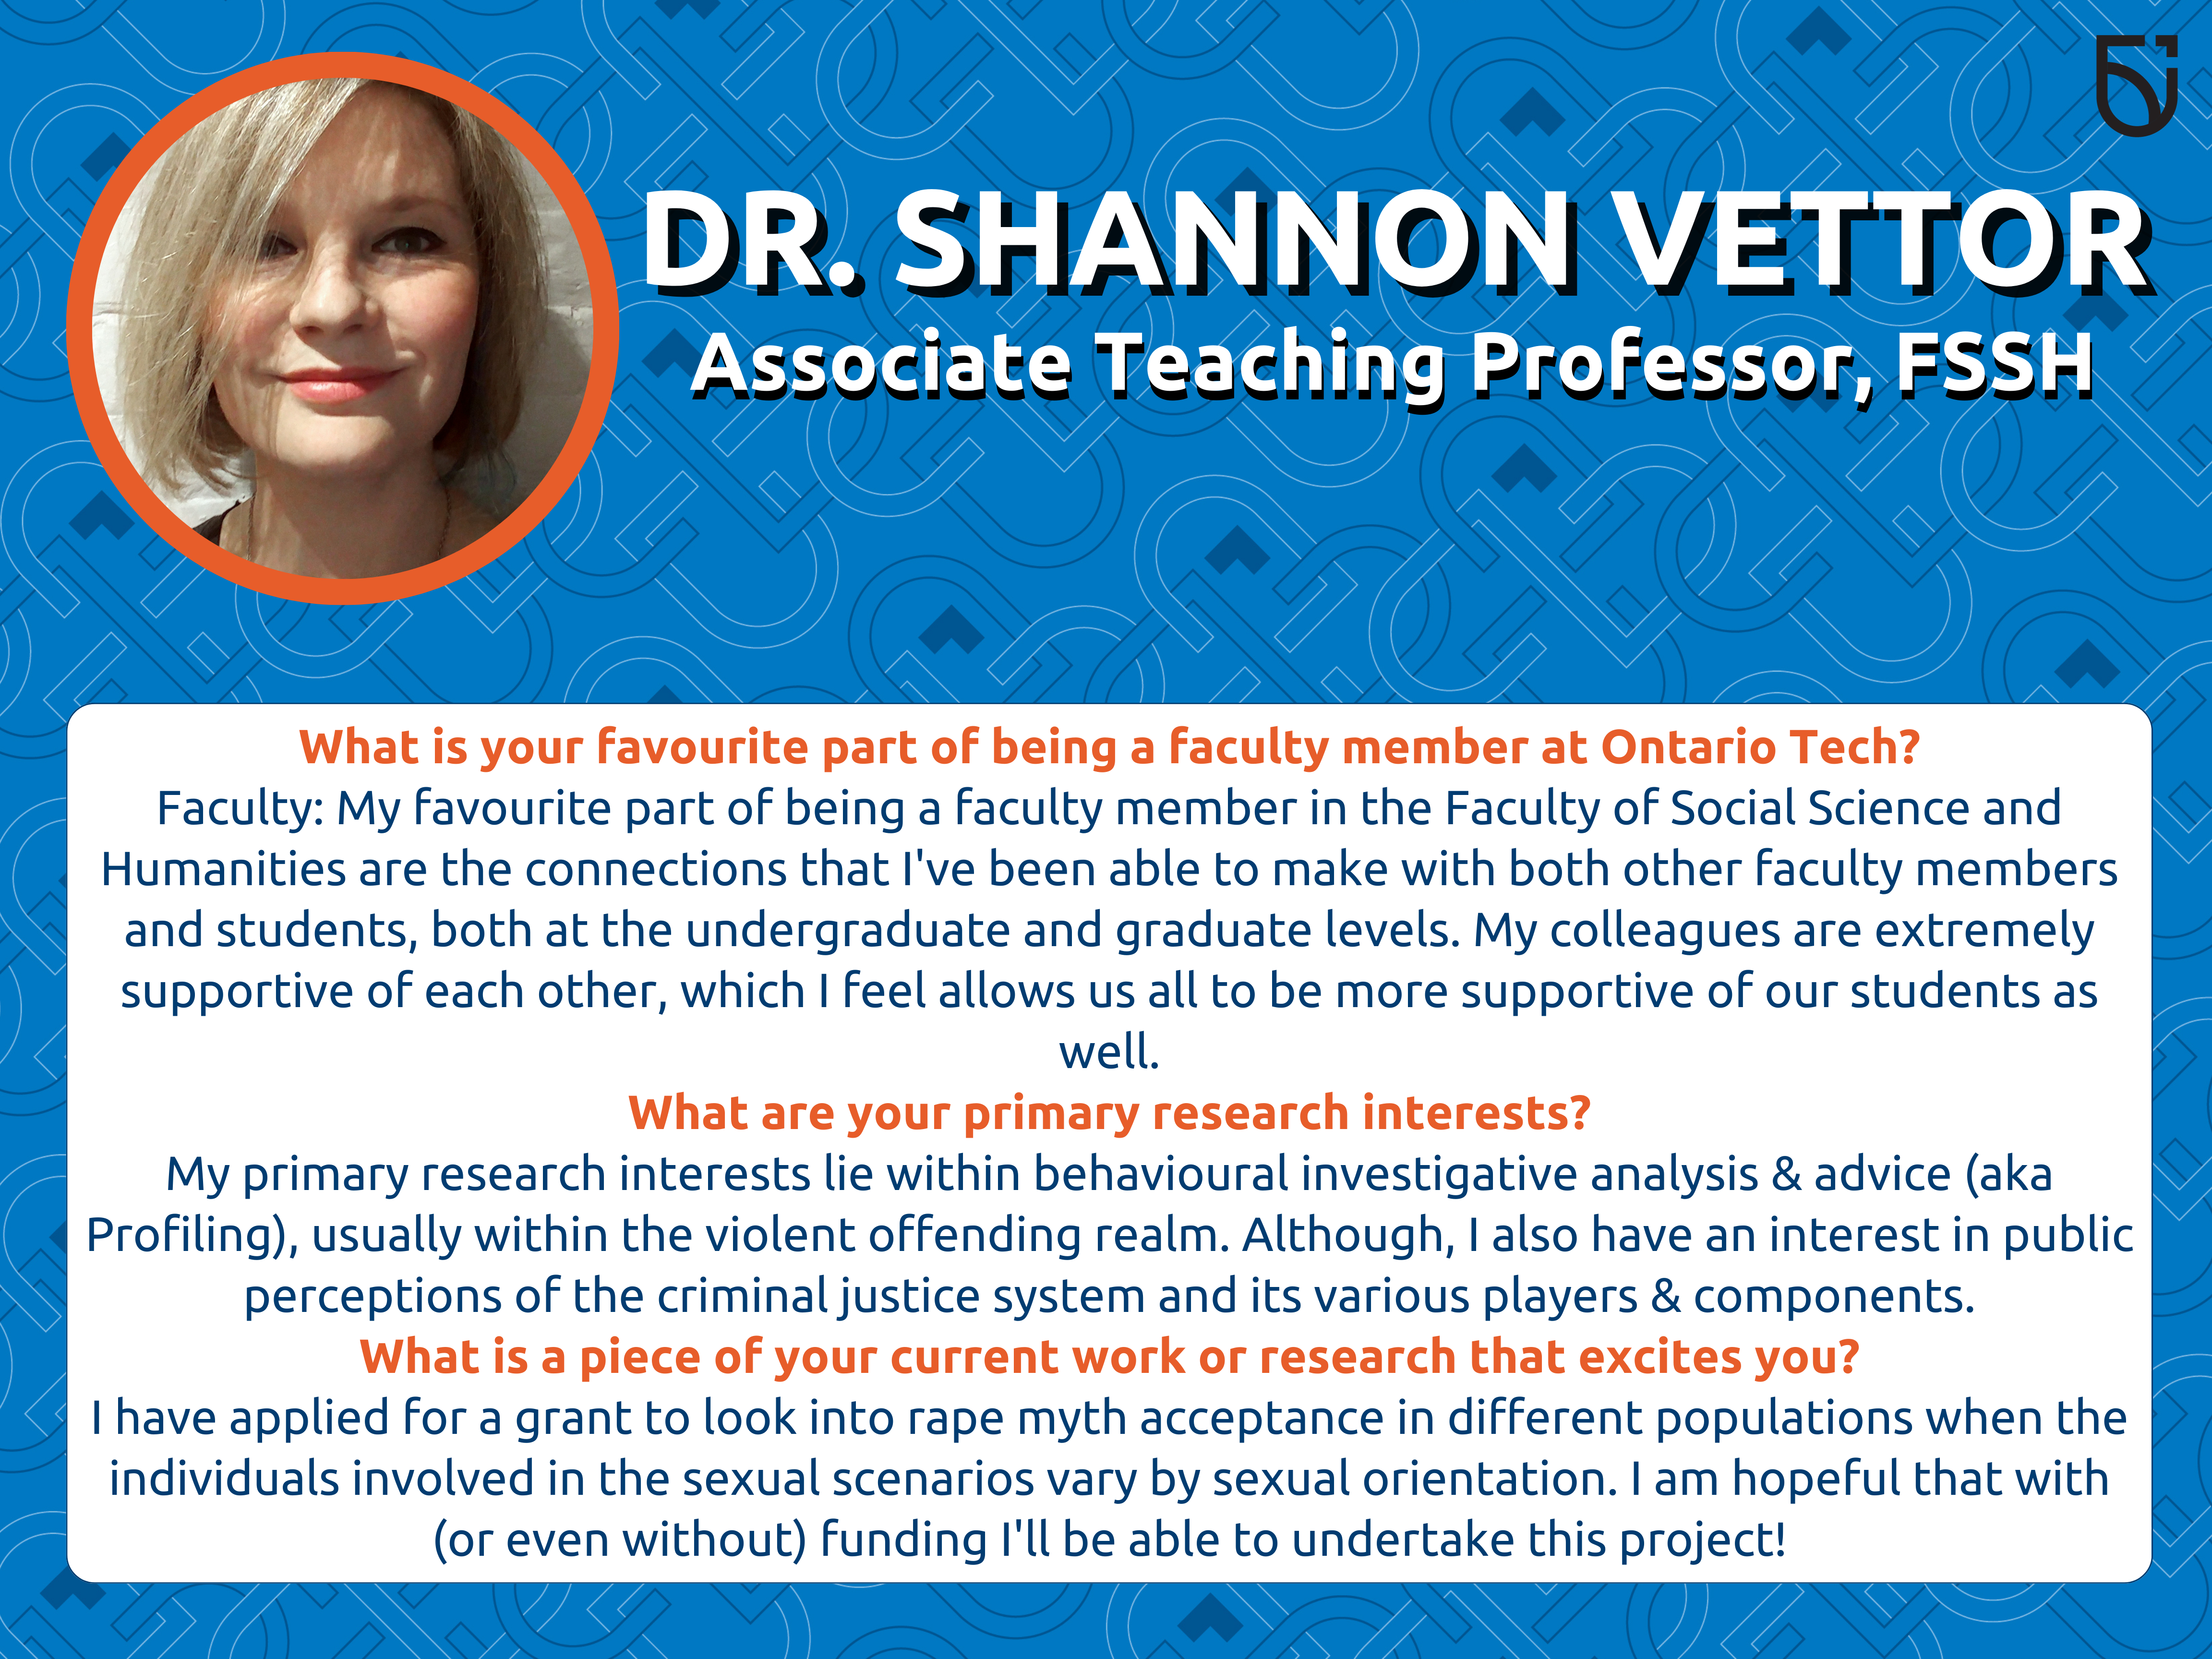 This photo is a Women’s Wednesday feature of Dr. Shannon Vettor, an Associate Teaching Professor in the Faculty of Social Science and Humanities